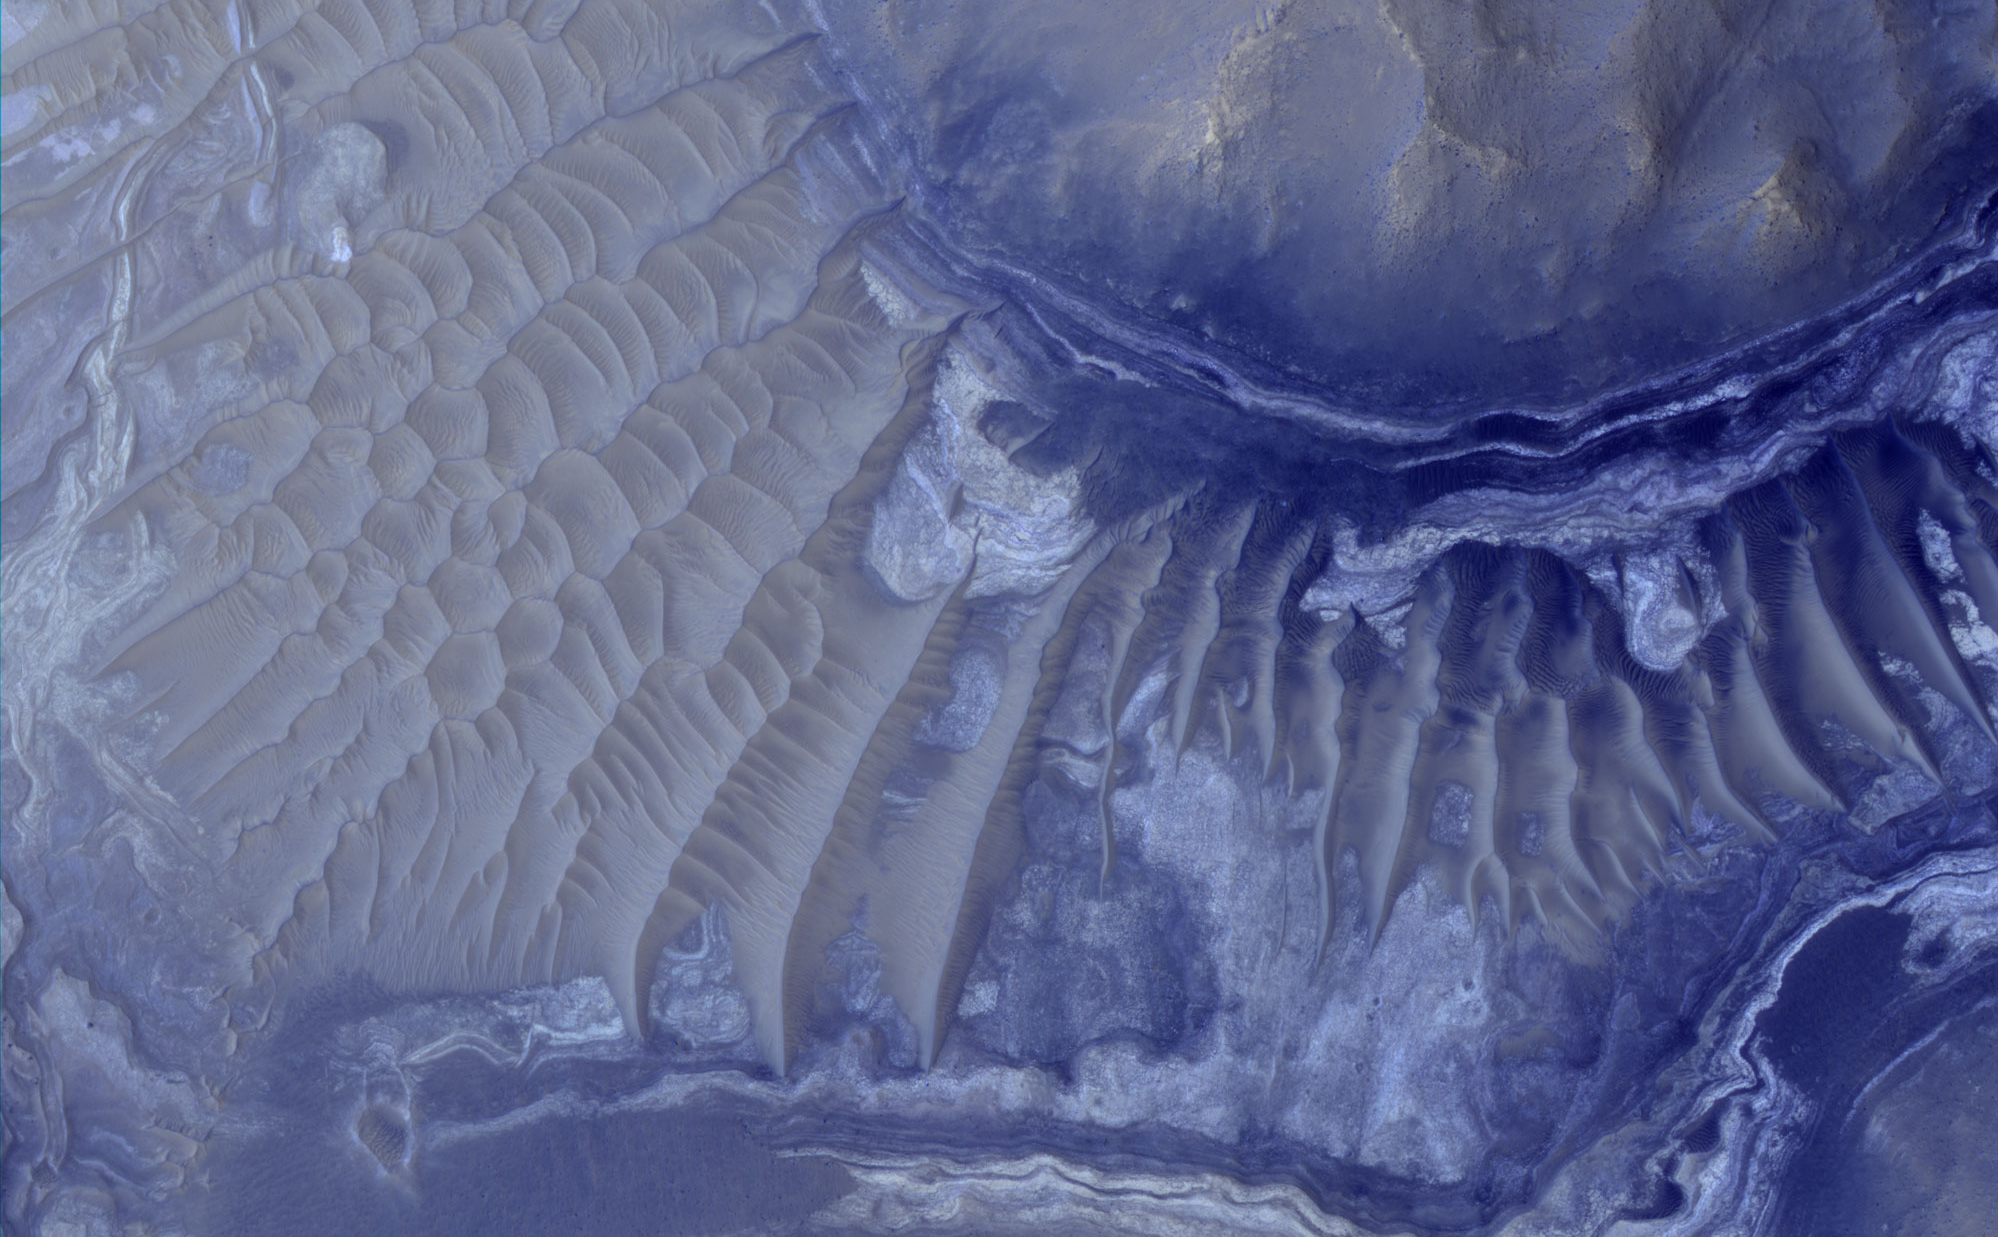 Layers in the lower portion of two neighboring buttes within the Noctis Labyrinthus formation on Mars are visible in this image from the High Resolution Imaging Science Experiment (HiRISE) camera on NASA's Mars Reconnaissance Orbiter. The view covers an area about 1 kilometer (0.6 mile) wide.